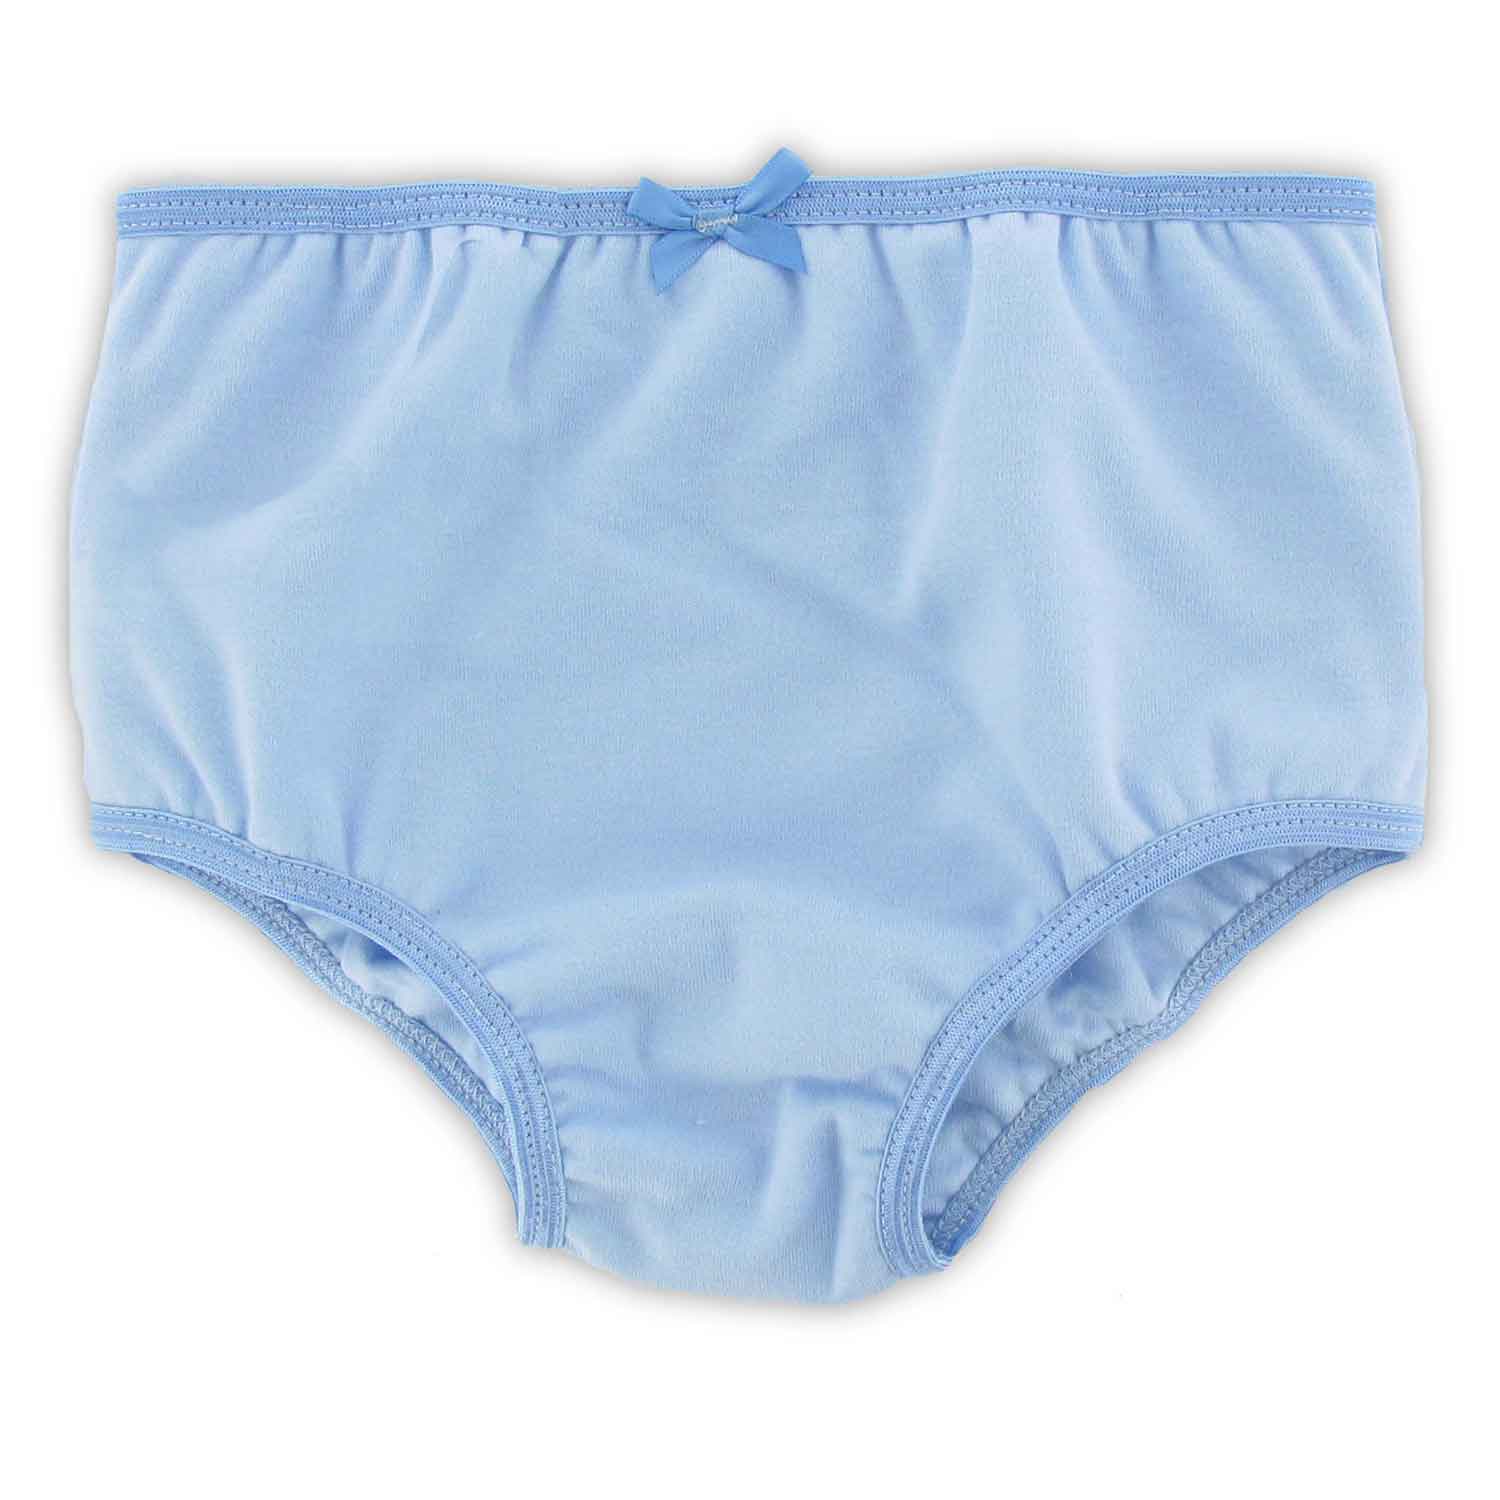 My Private Pocket Underwear for Boys - Variety 3 Pack - Bedwetting